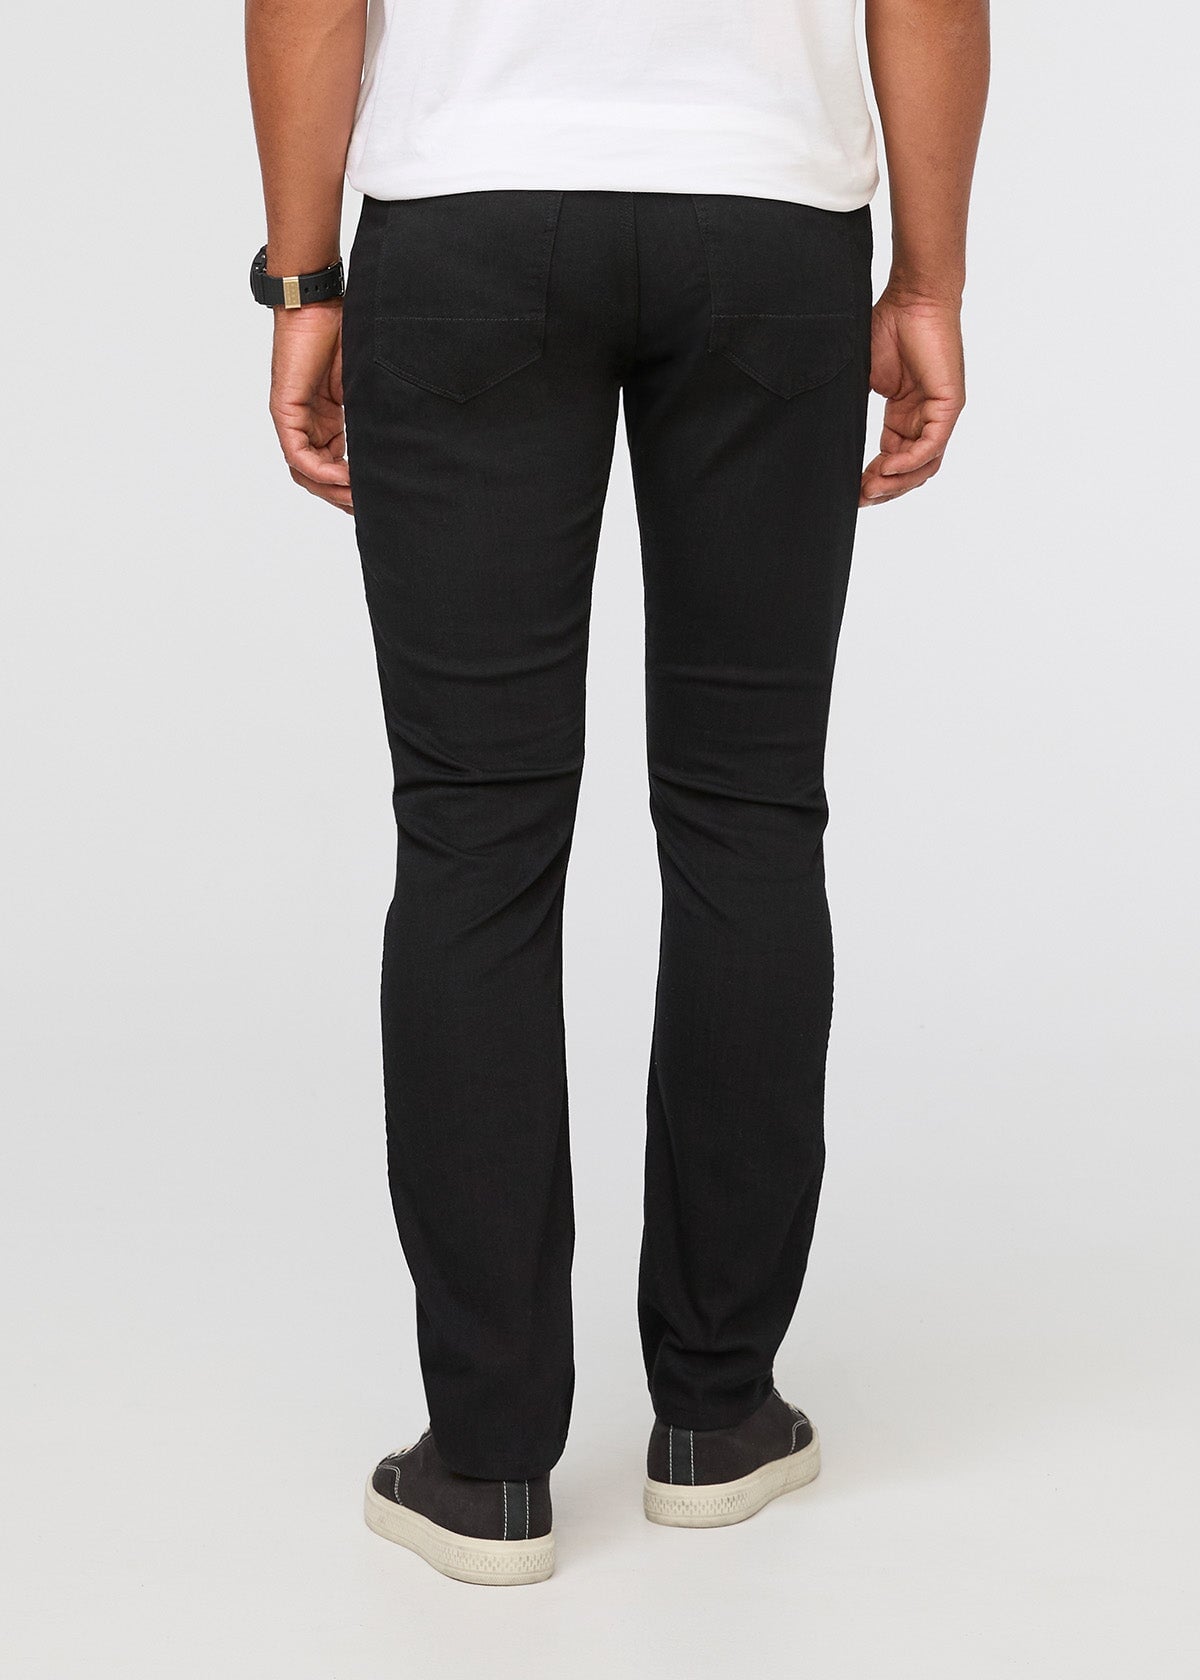 Black Tapered Athletic Fit Jeans